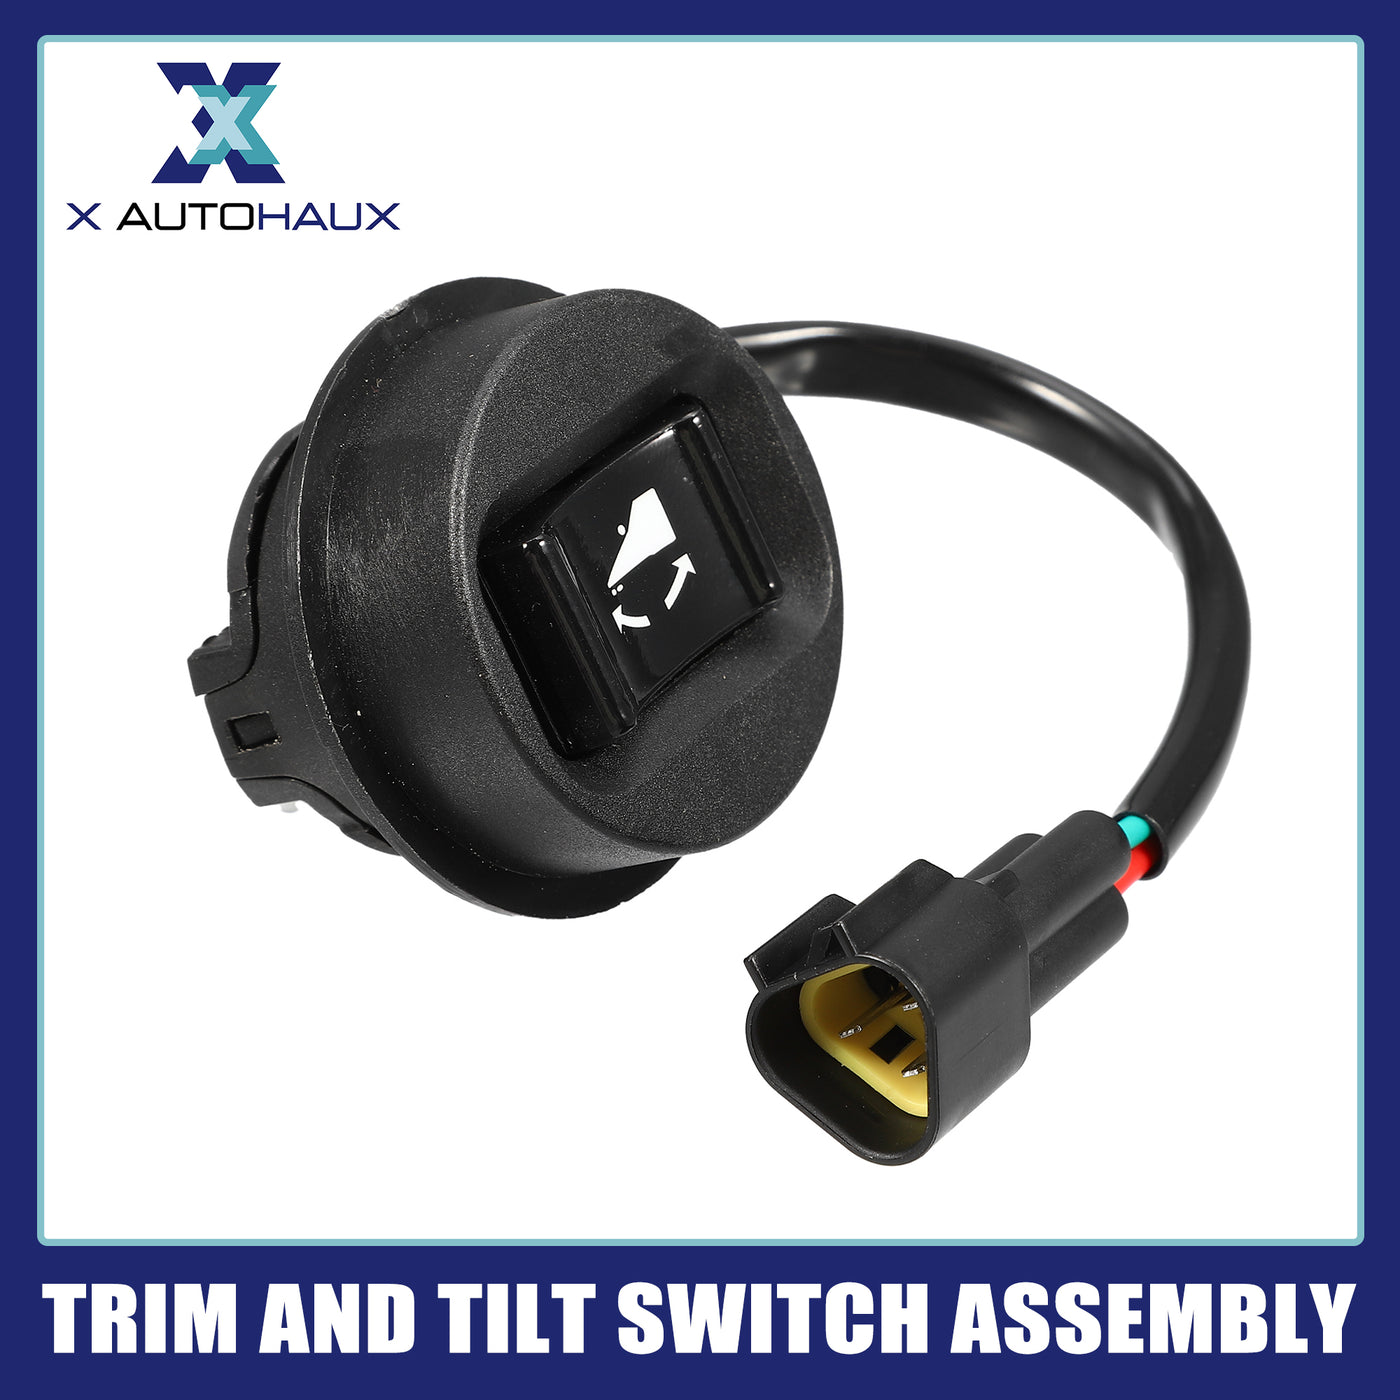 X AUTOHAUX Trim and Tilt Switch Assembly 6R3-82563-00-00 for Yamaha Outboard 2 Stroke 115HP-225HP 3 Pin Tilt Control Switch 6R3-82563-01-00 for Yamaha Outboard Trim Tilt Switch Assy